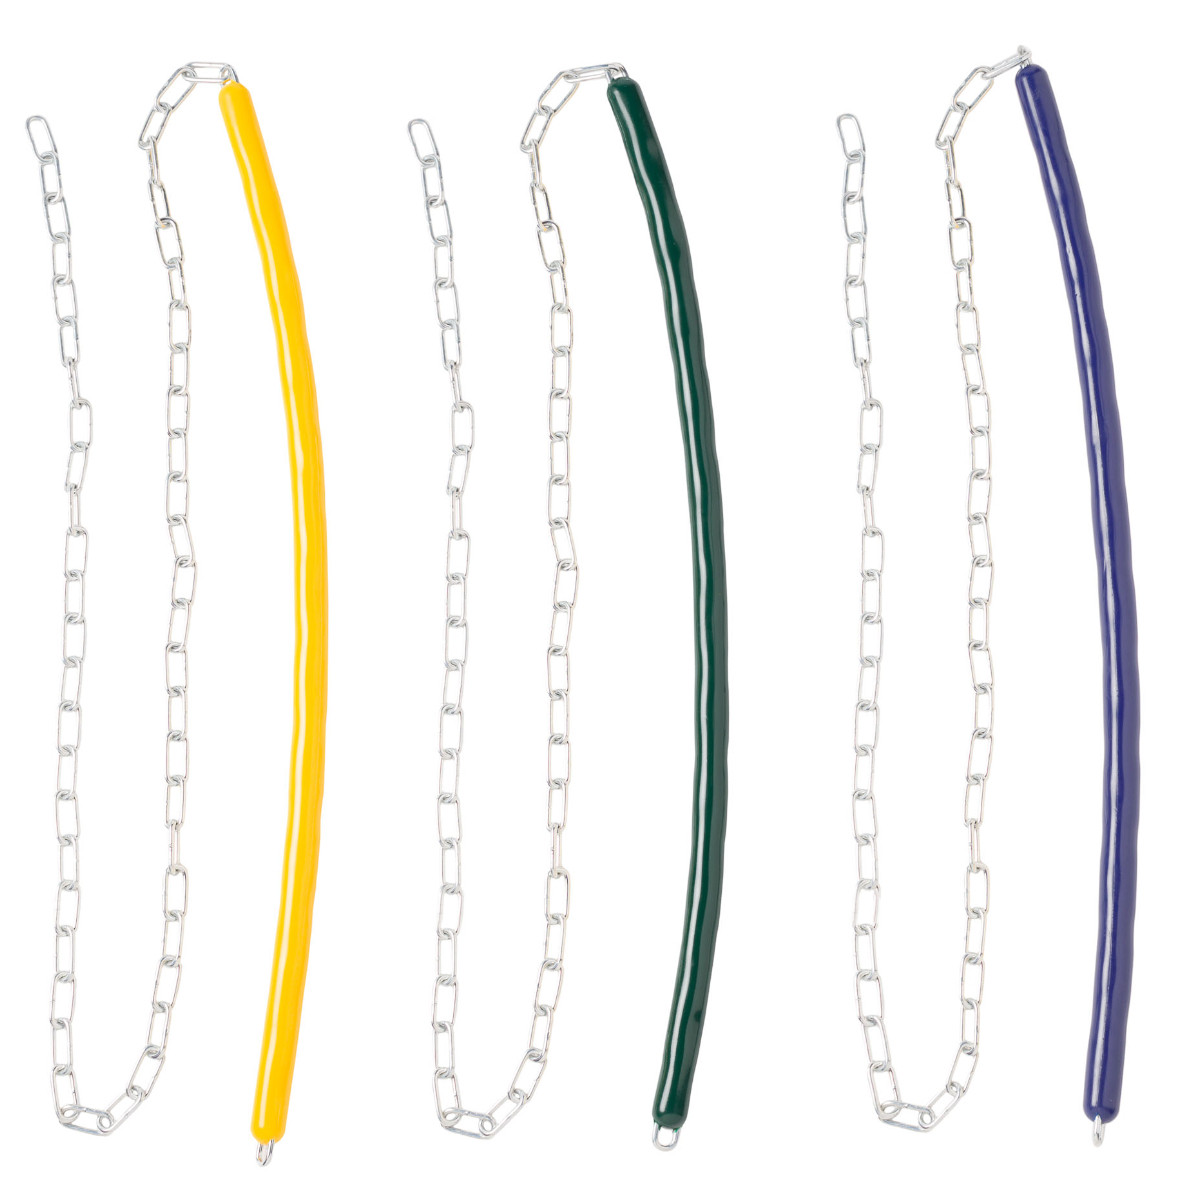 Soft Grip Coated Swing Chain (H-85S)